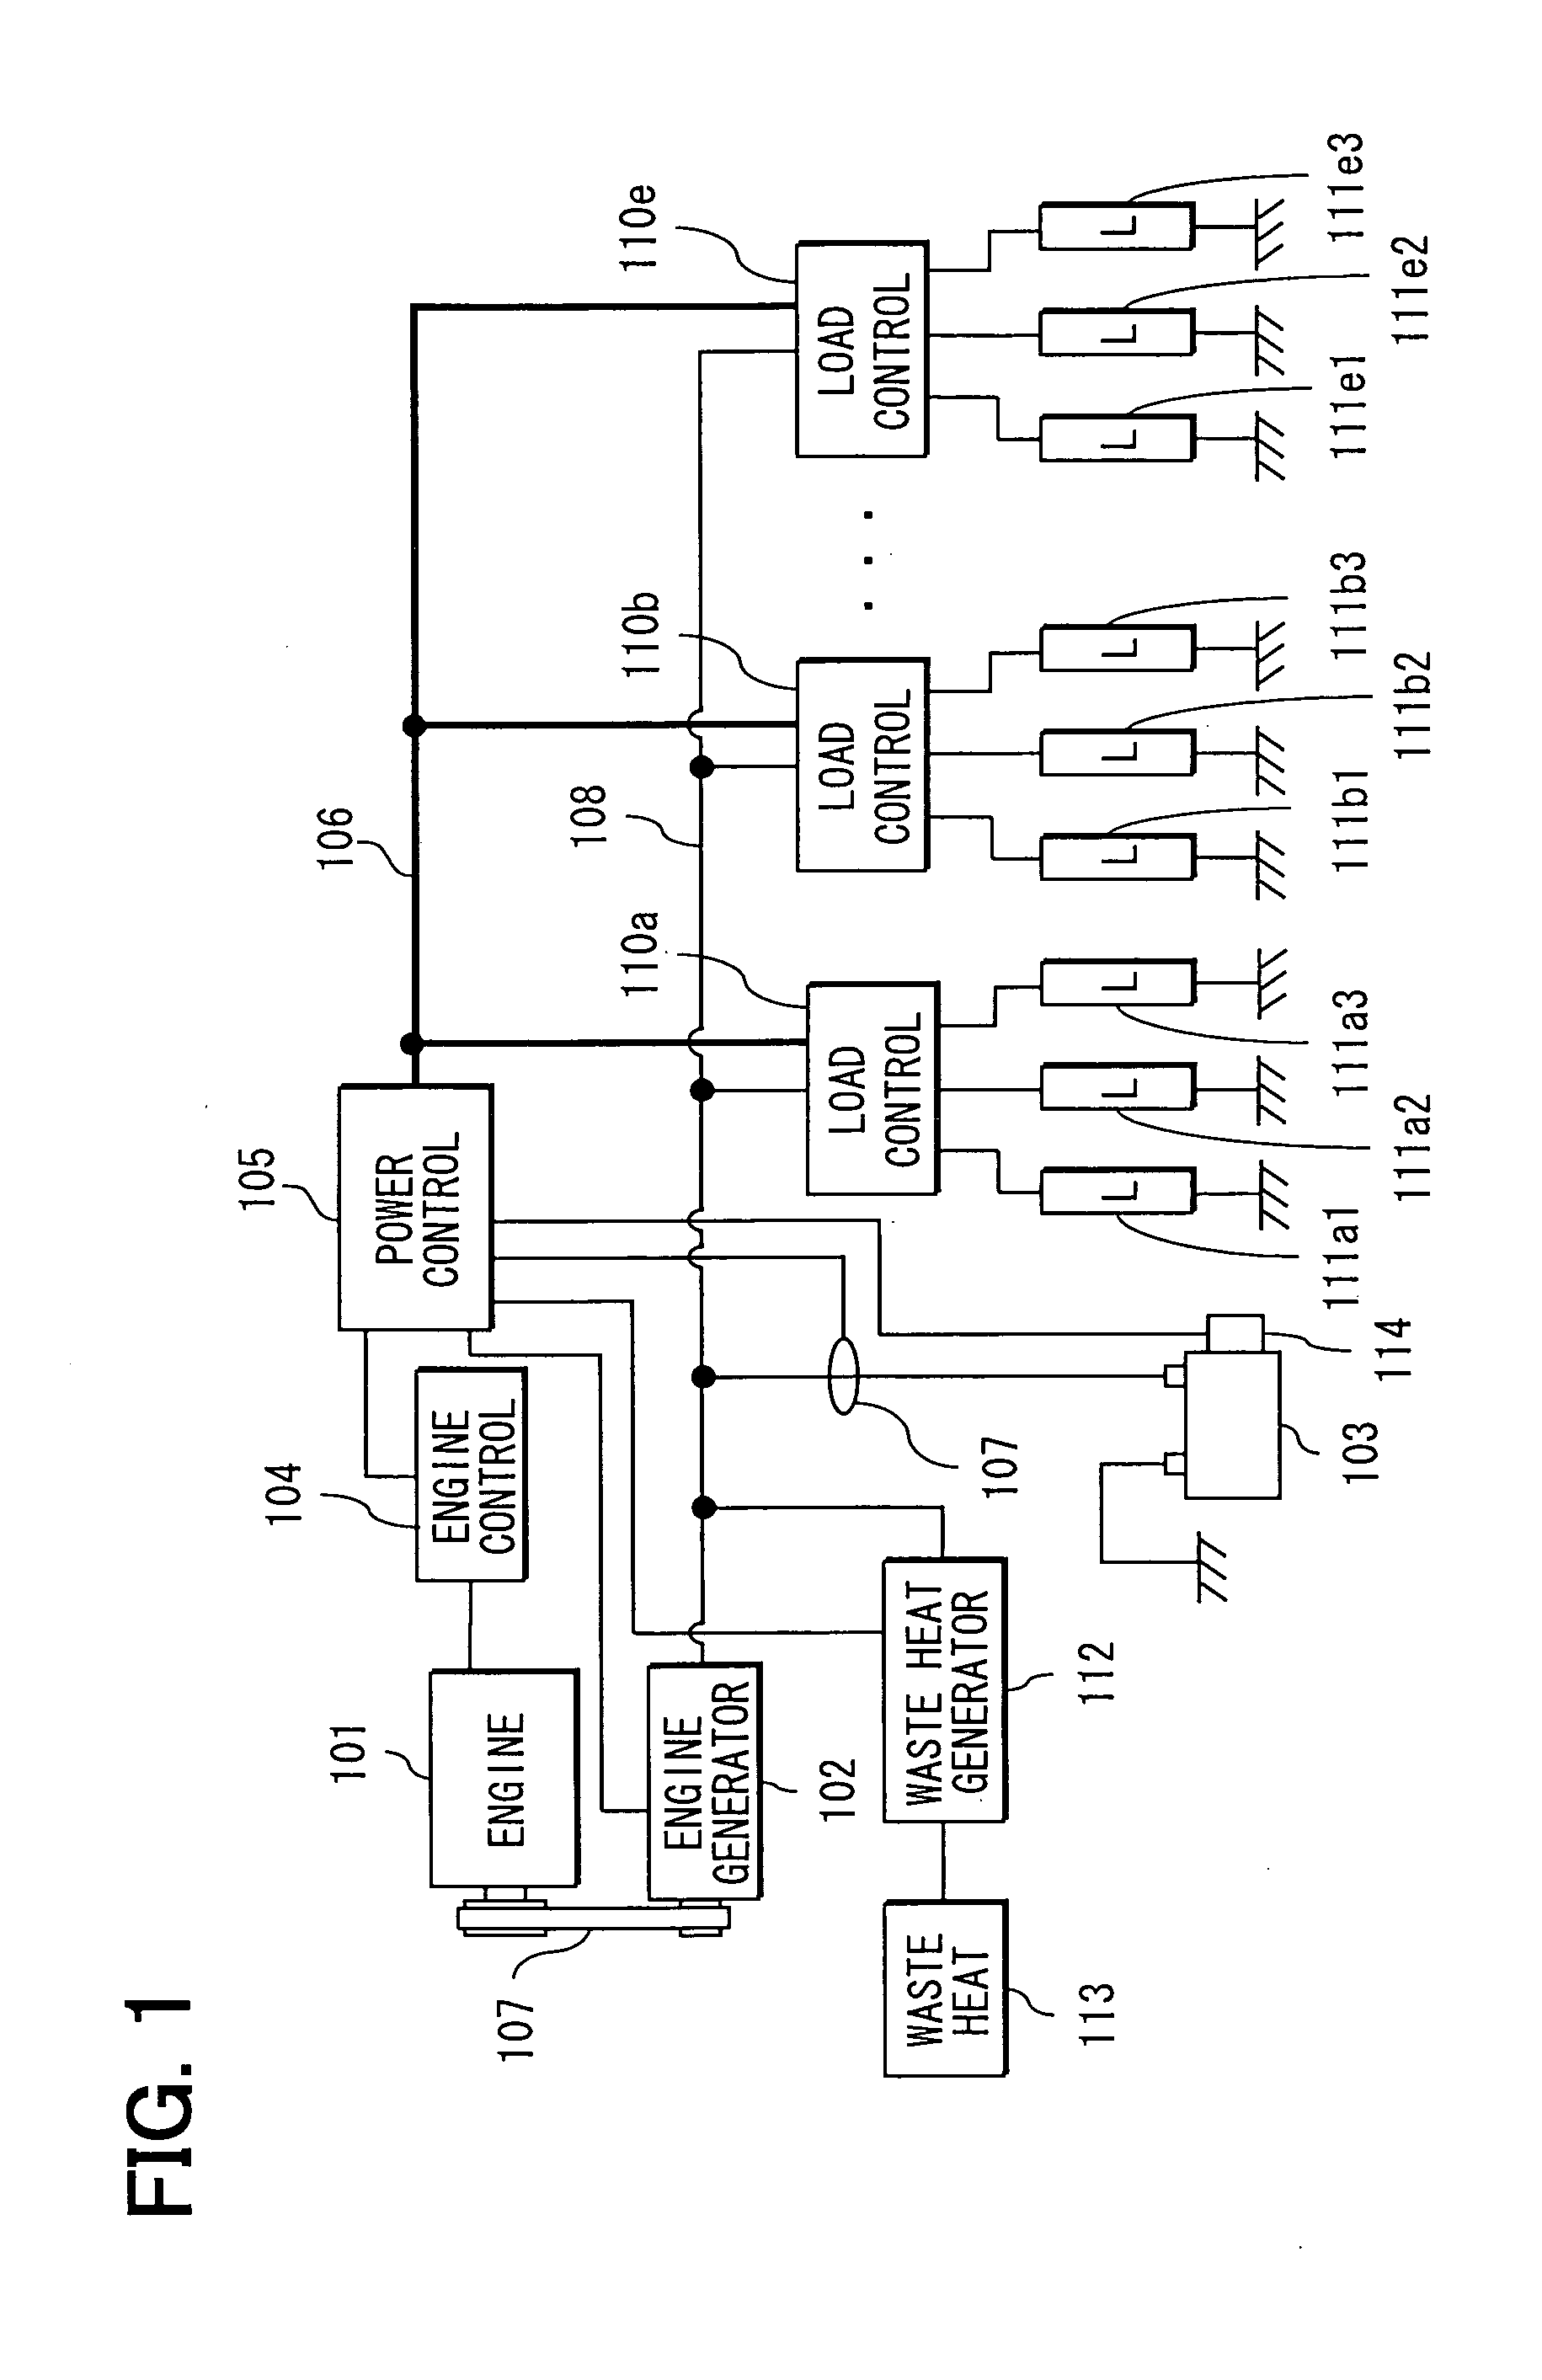 Power control apparatus and method for electrical system of vehicle